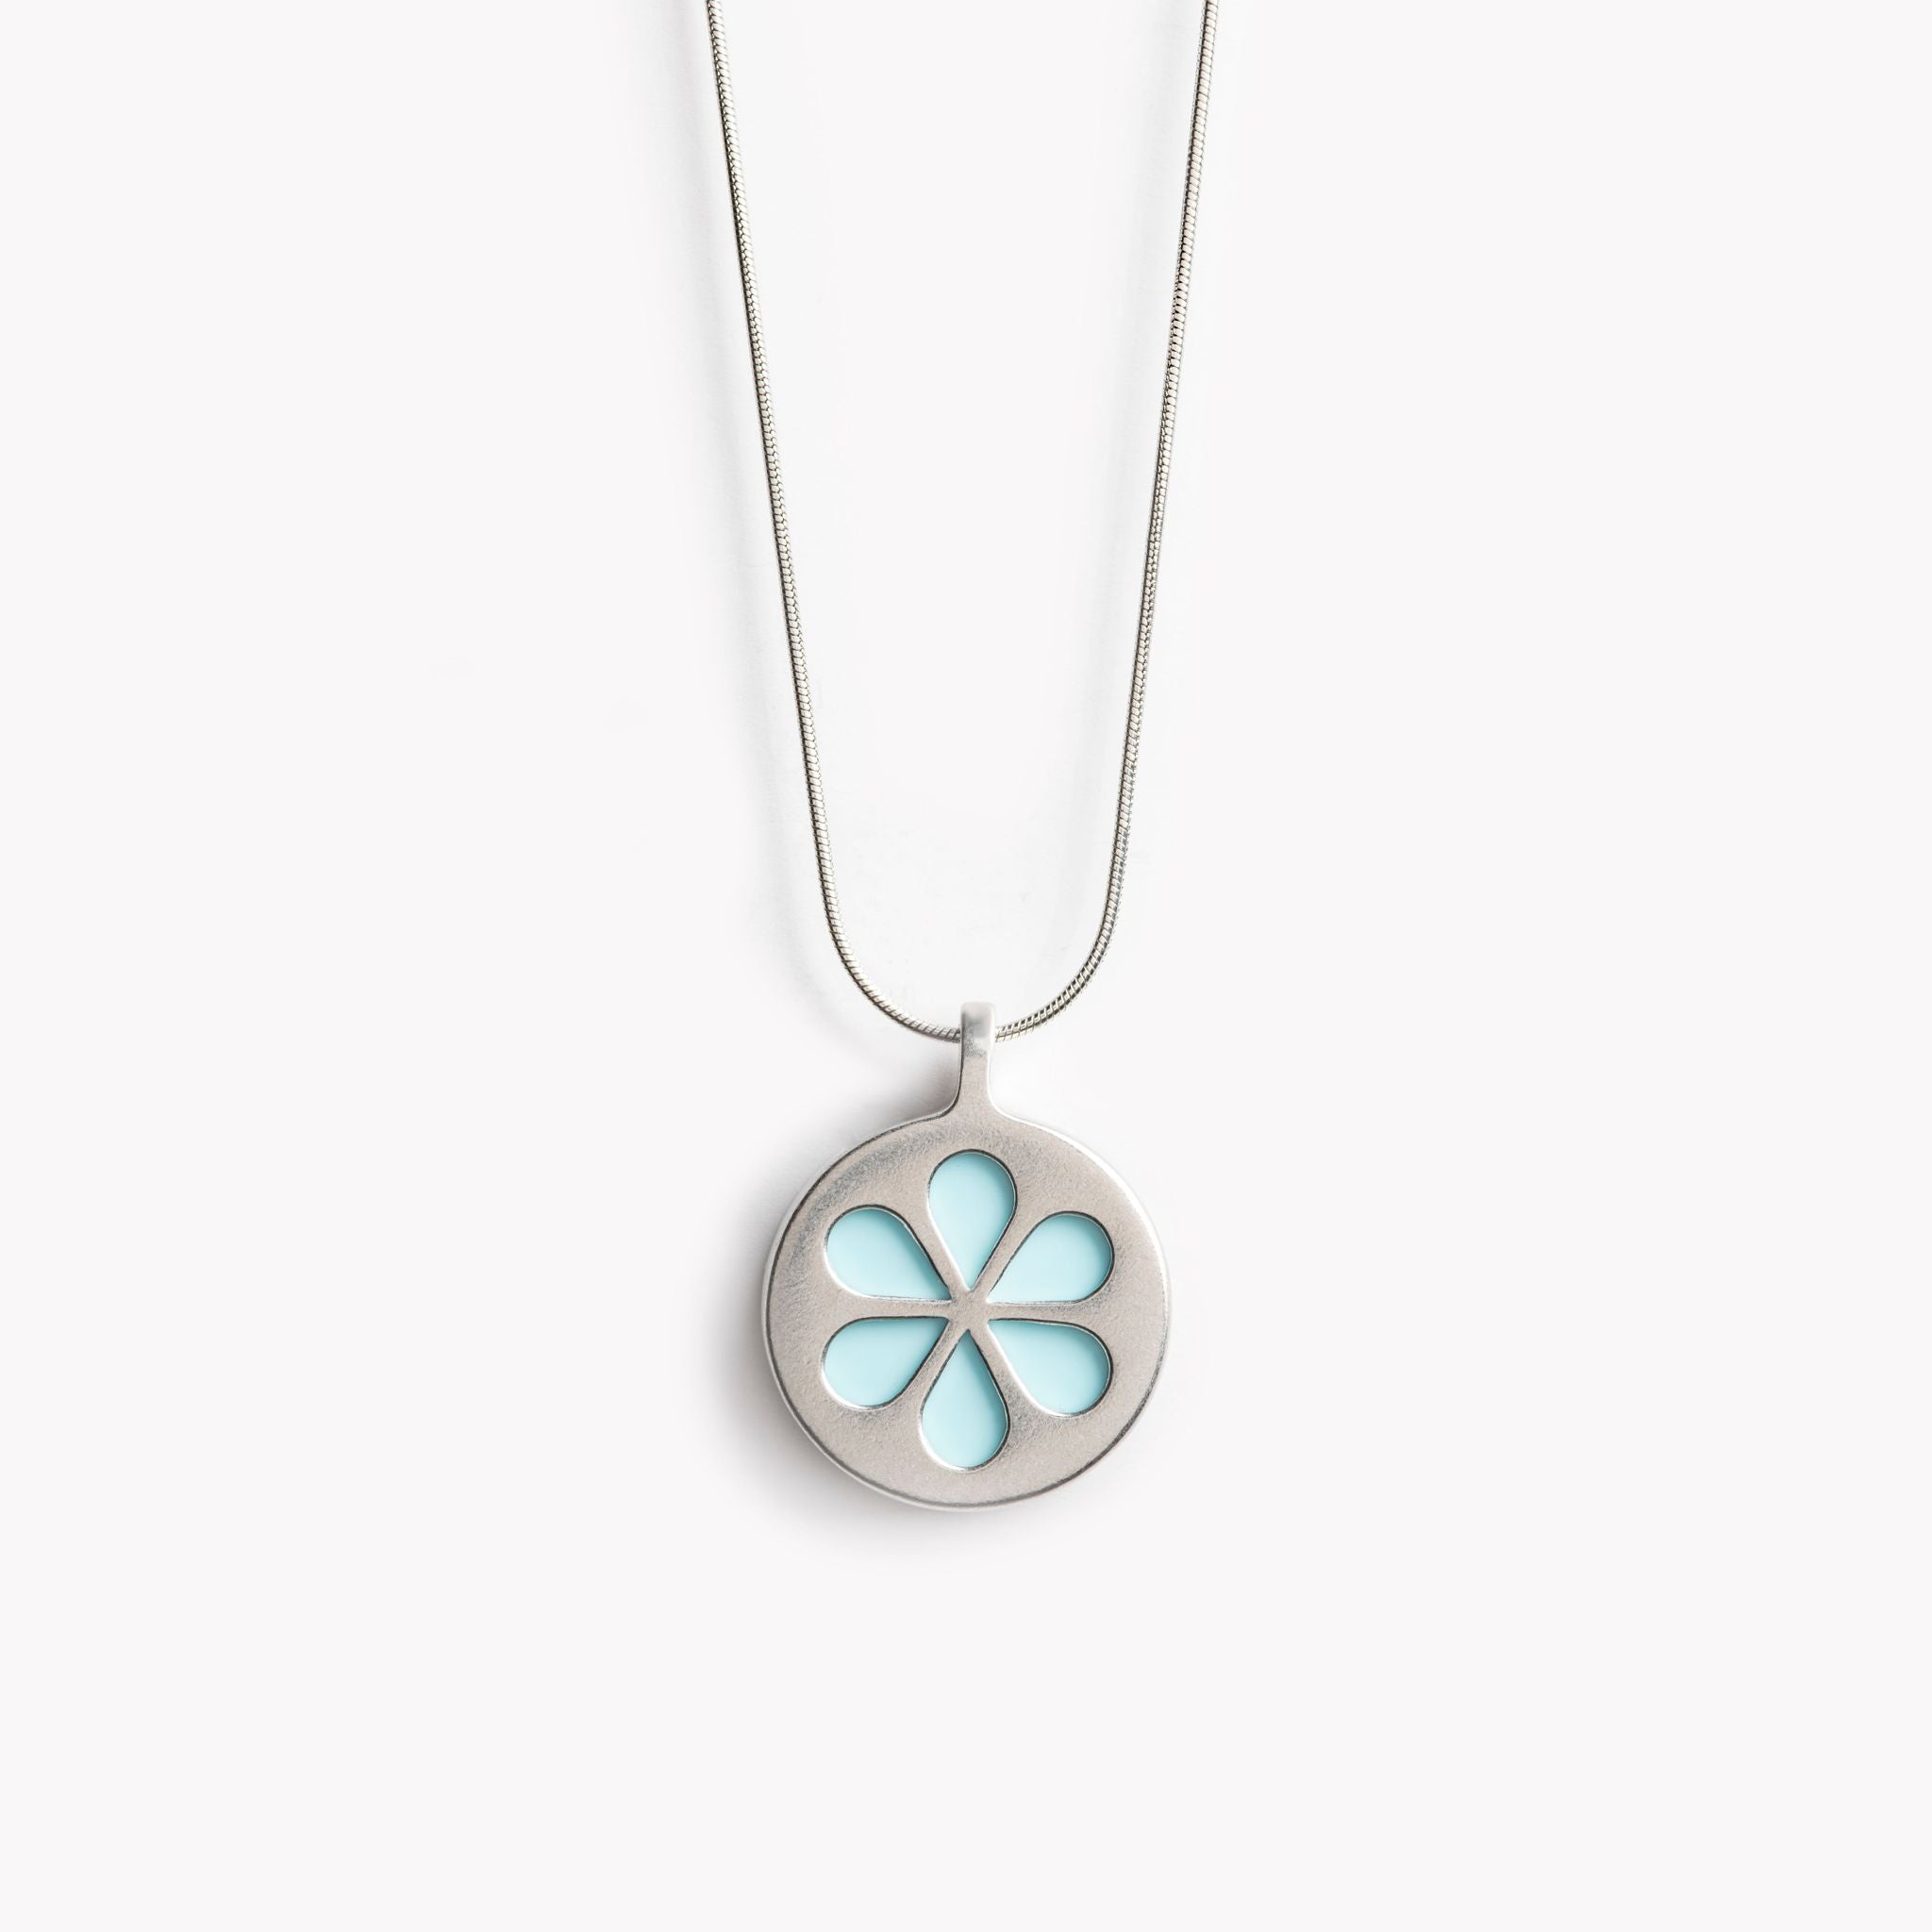 A simple circular pendant necklace with a pale turquoise flower petal design.